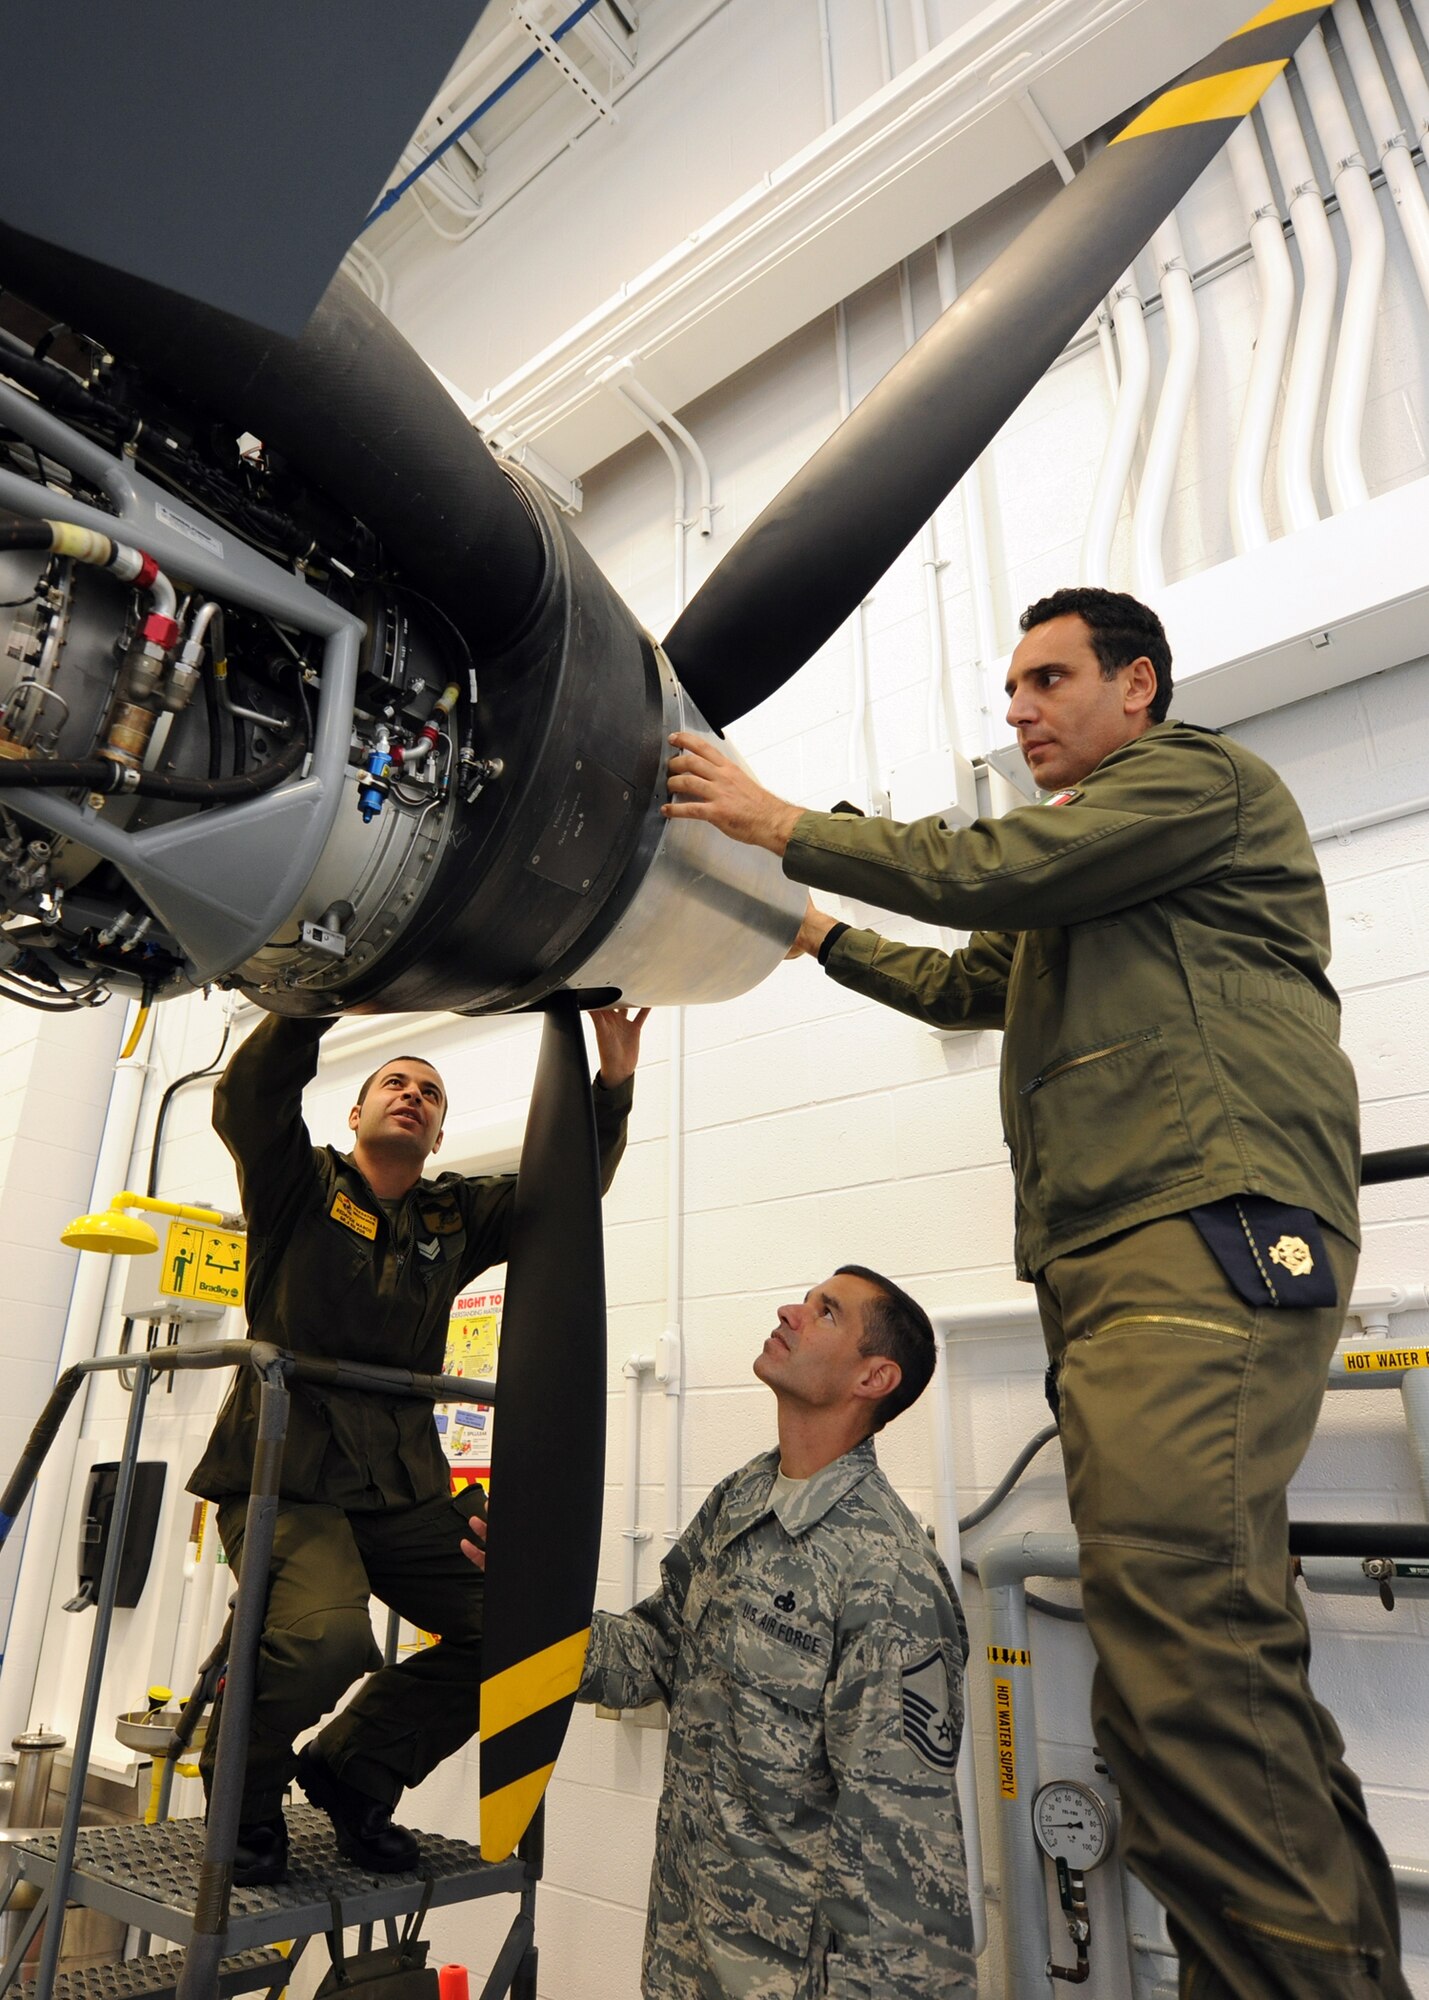 Italian Air Force Chief Warrant Officer Lorenzo Scafuto and Staff Sgt. Marco Redavide work together on a MQ-9, while receiving feedback from their instructor Master Sgt. Scott Simpson at the Field Training Detachment (FTD) in Syracuse NY, on 20 Sept 2011.  Scafuto and Redavide are the first Italian Air Force members to receive formal maintenance training on the MQ-9.  They are part of the 100th graduating class from the 174 FW FTD, which is the sole formal MQ-9 maintenance training facility in the U.S. Air Force. (Photo by Staff Sgt Ricky Best)